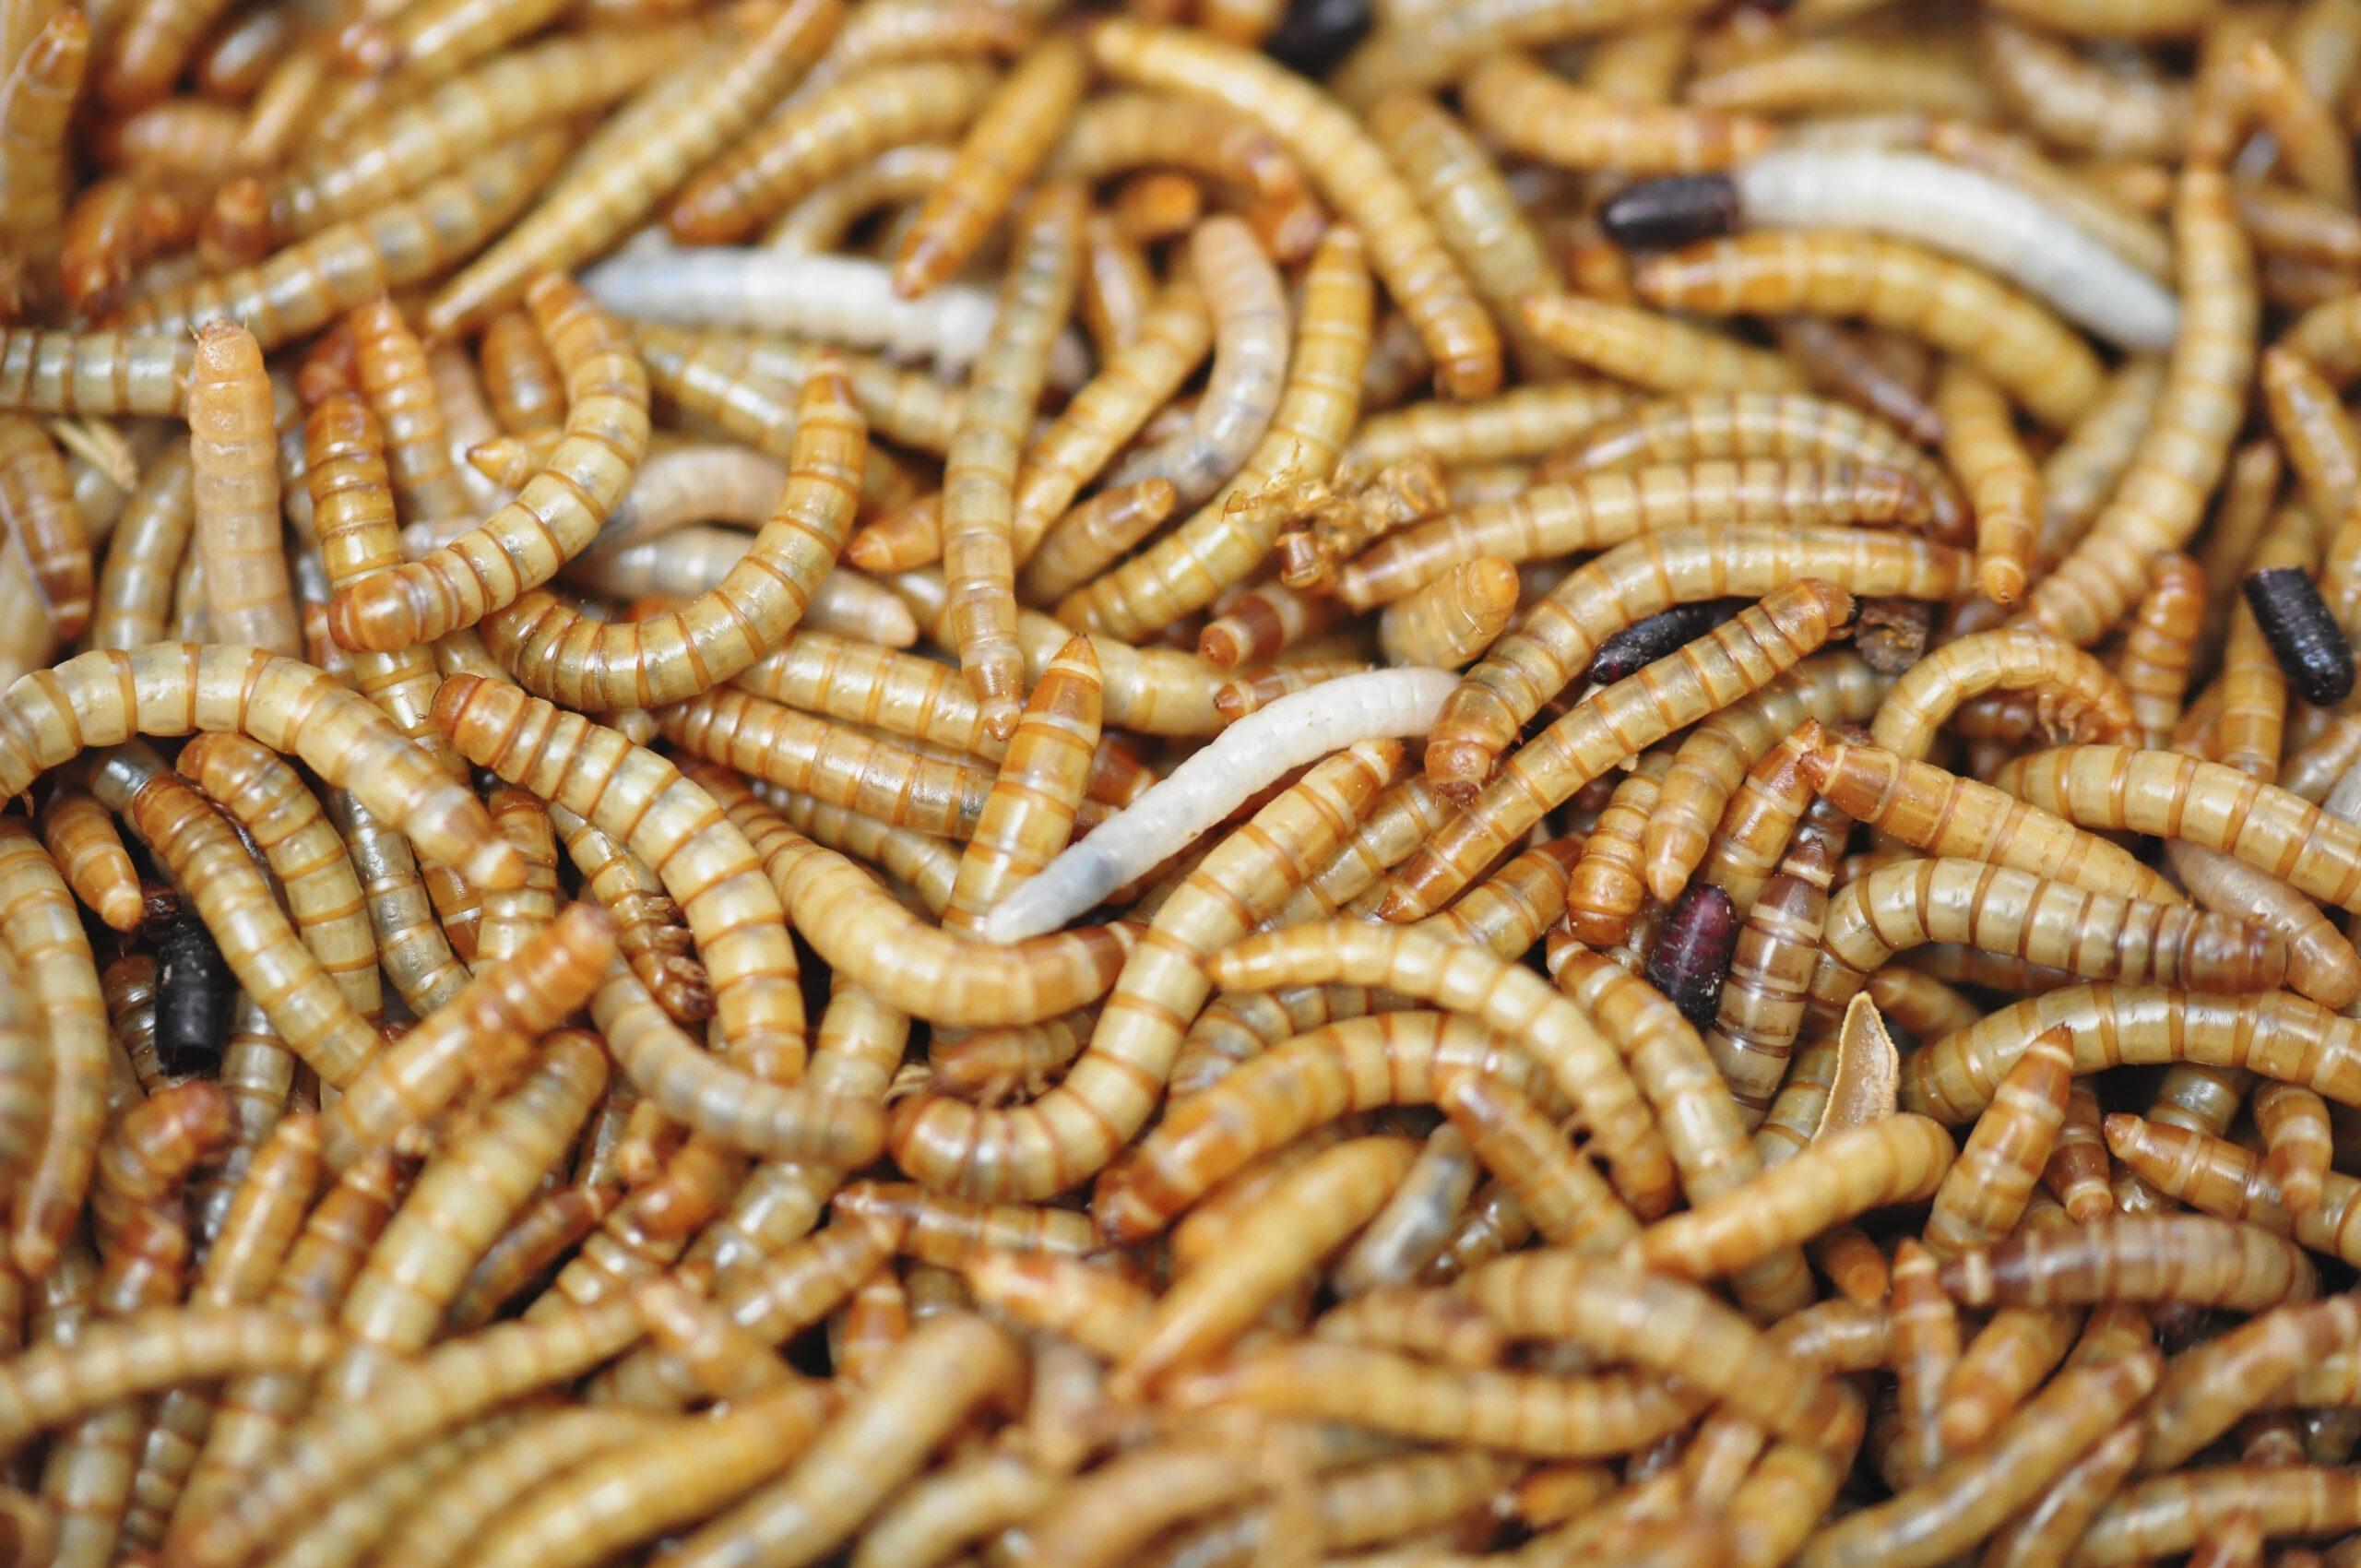 Insects, a future source of valuable animal feed in the Caribbean